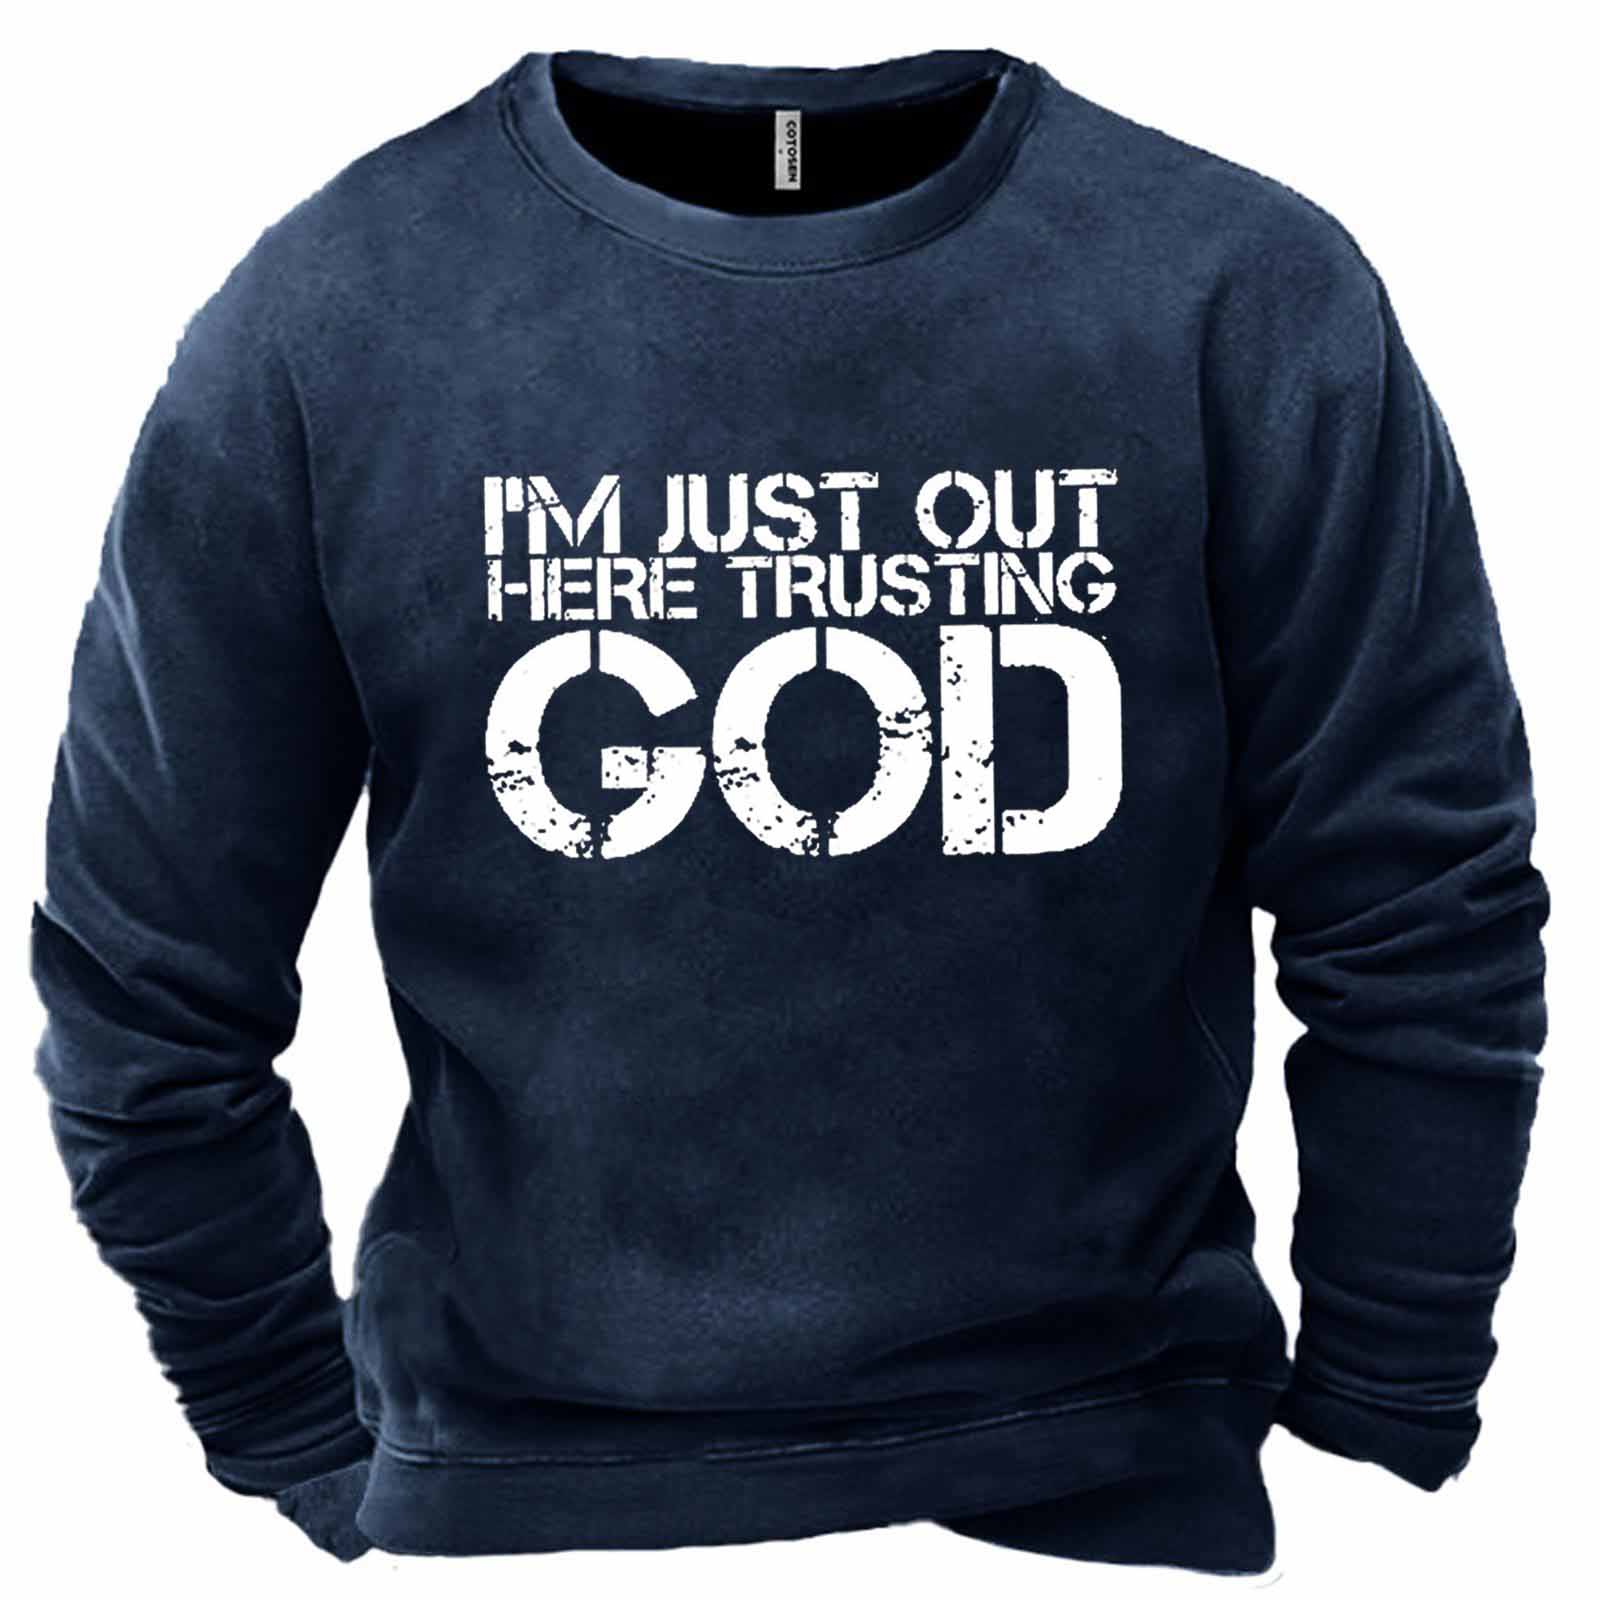 Men's I'm Just Out Chic Here Trusting God Print Sweatshirt